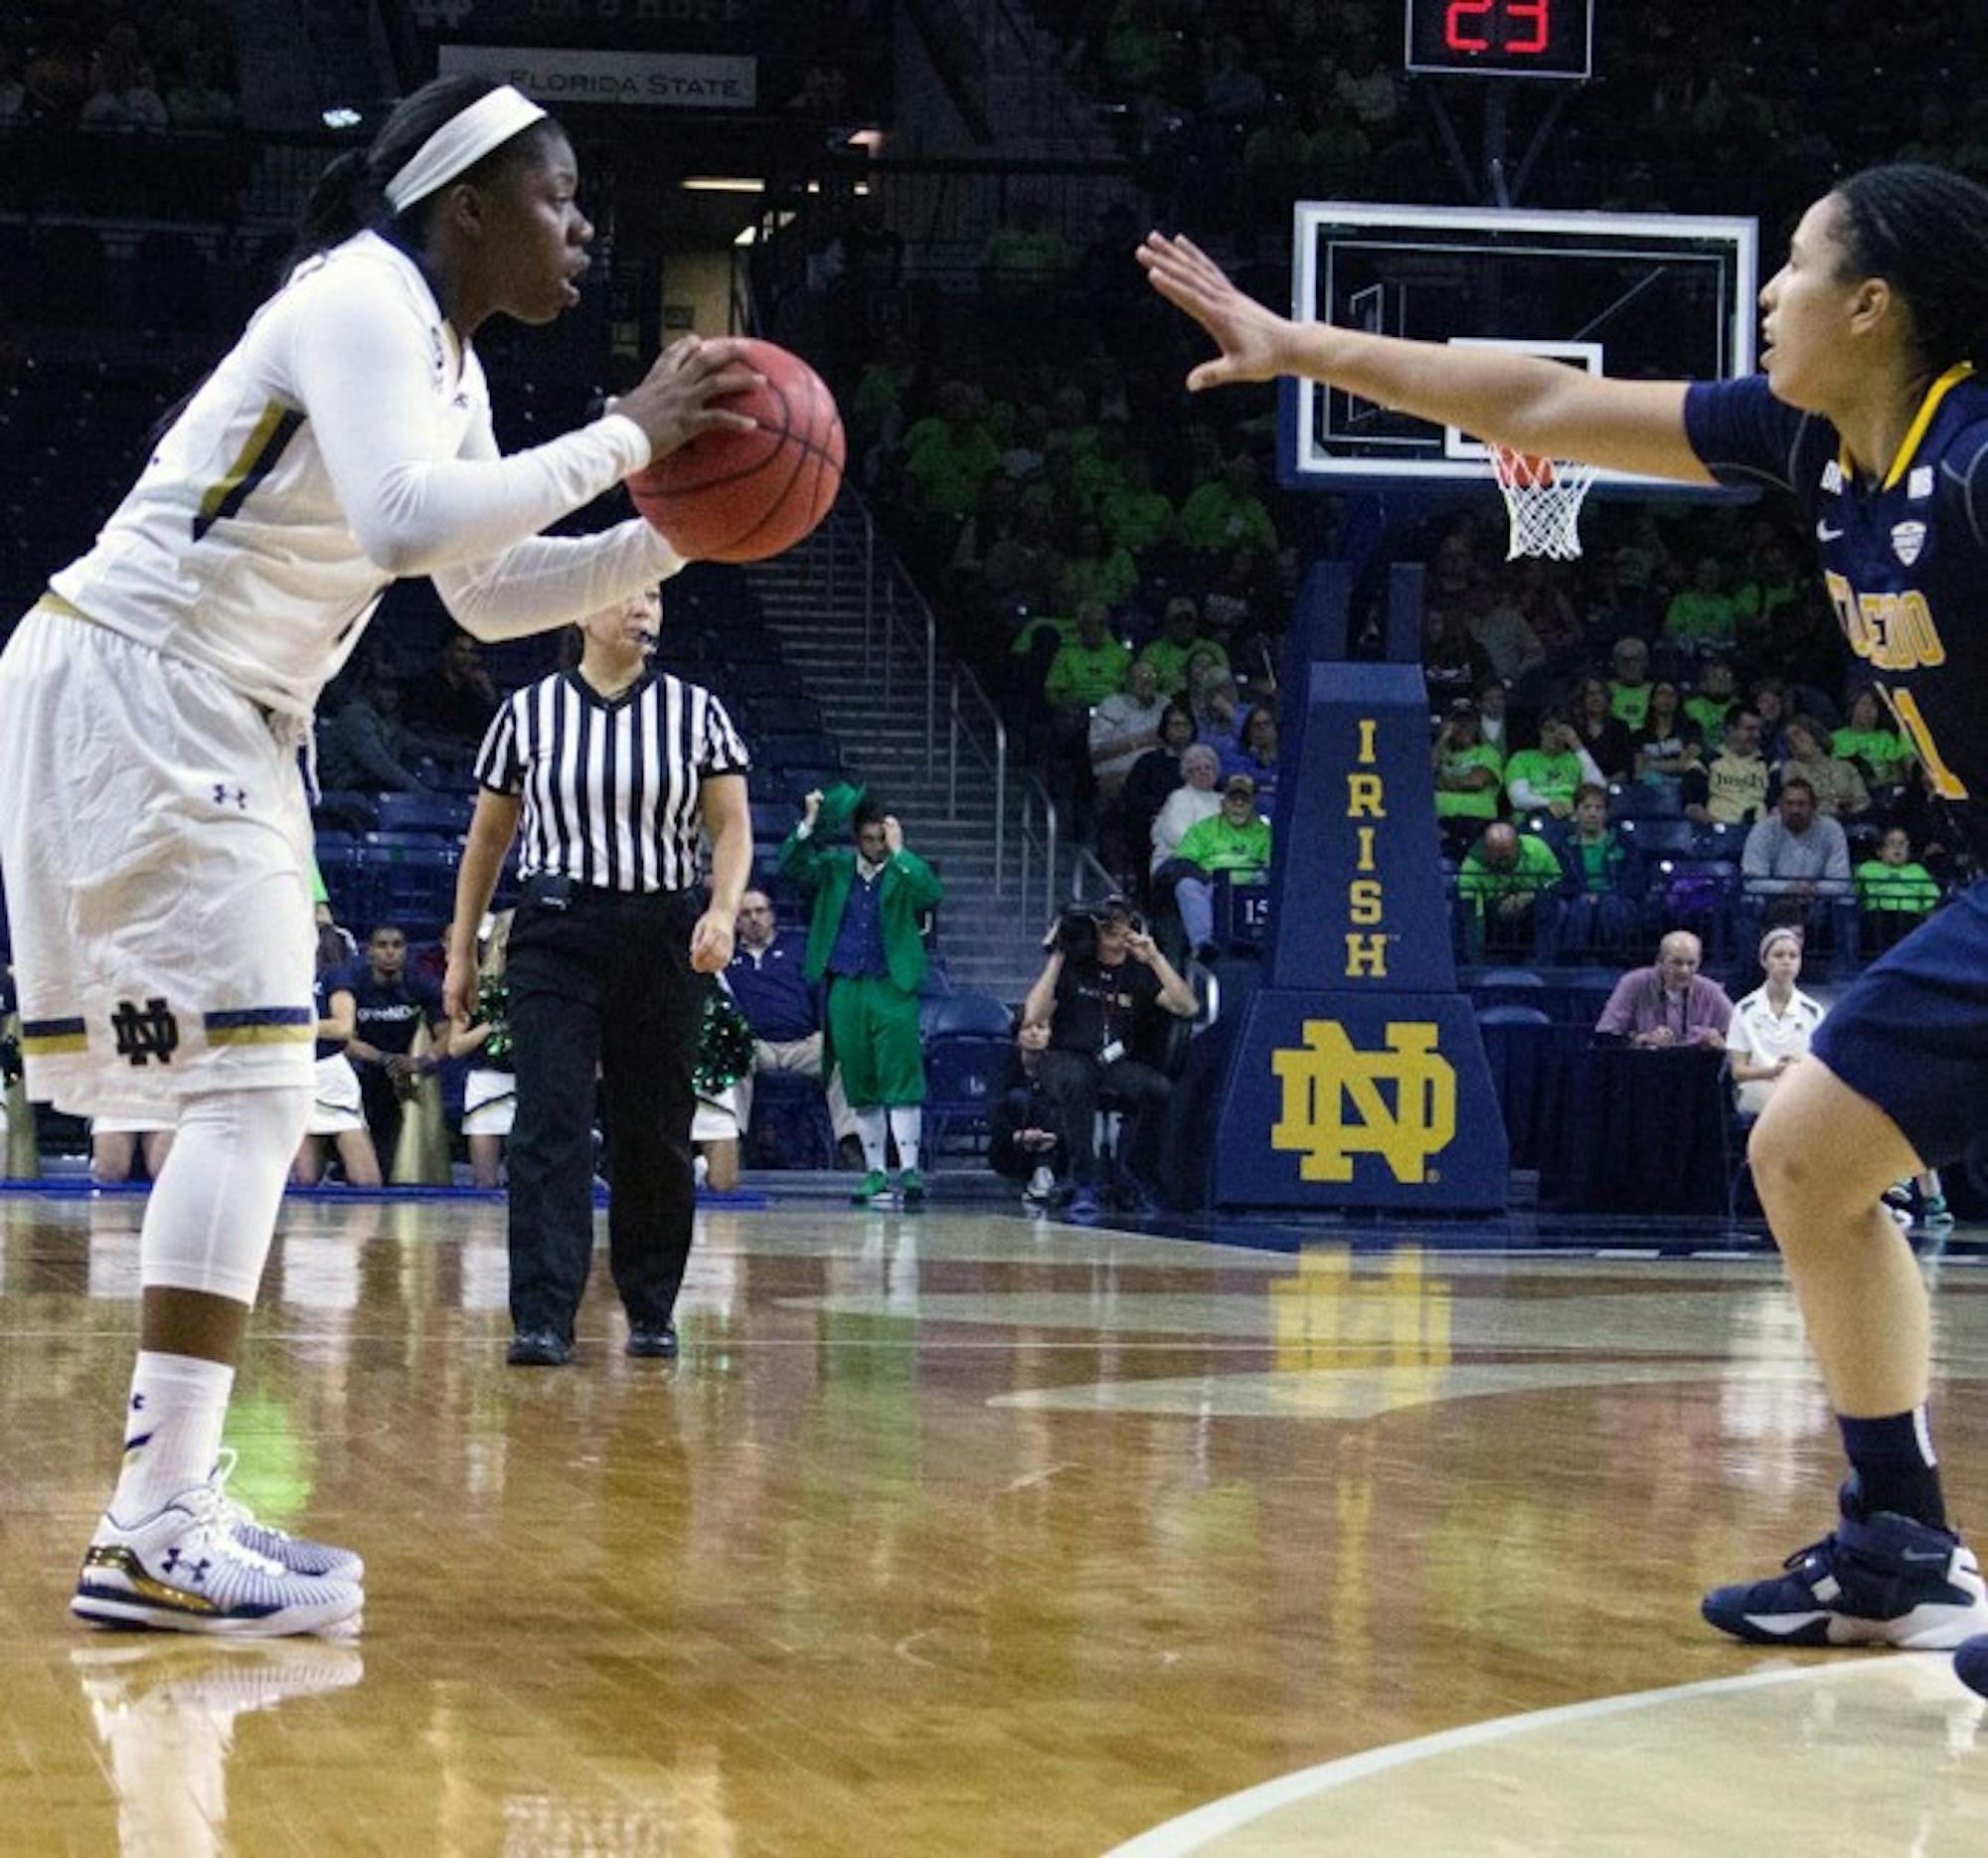 Freshman guard Arike Ogunbowale surveys the action during Notre Dame’s 74-39 victory over Toledo on Nov. 18 at Purcell Pavilion. Ogunbowale had nine points and six rebounds in the win.